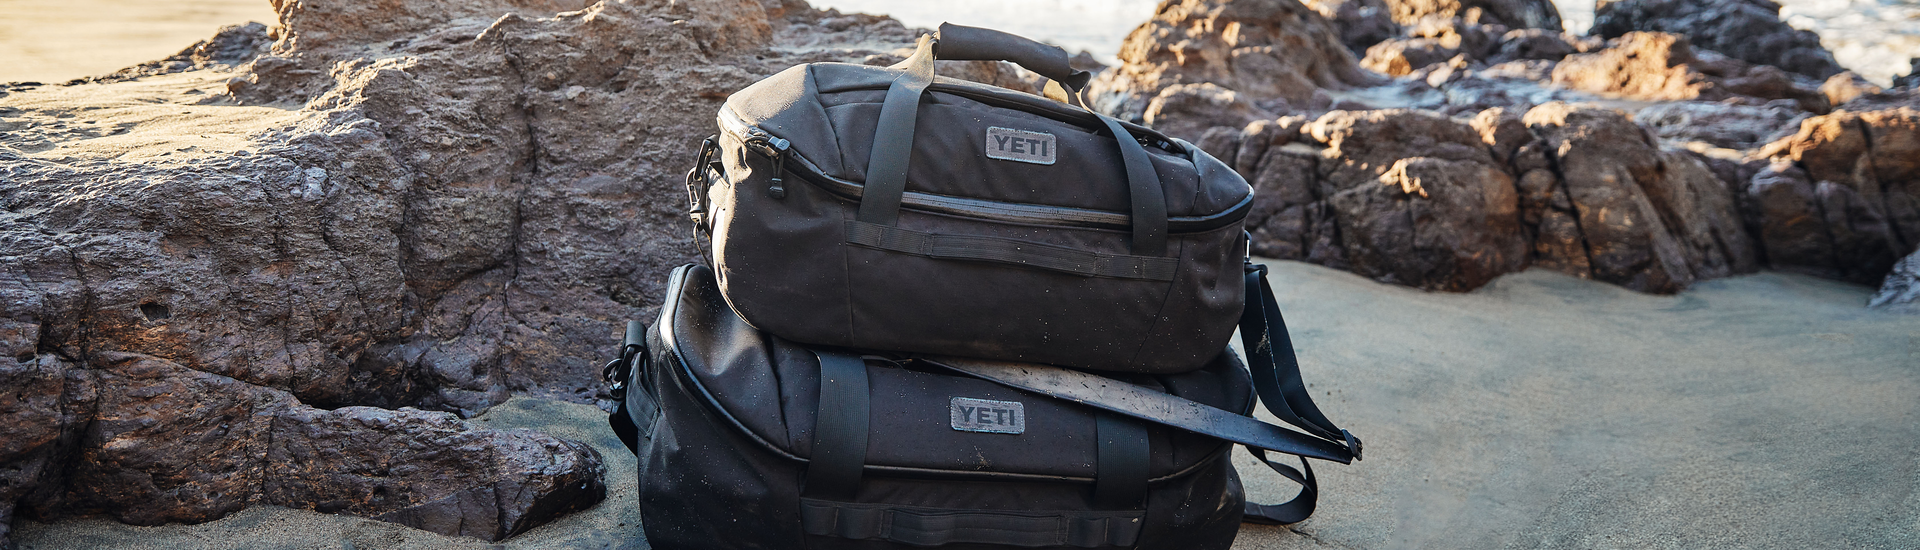 New YETI 'Crossroads' Packs & Bags Ready to Hit the Road - Man Makes Fire